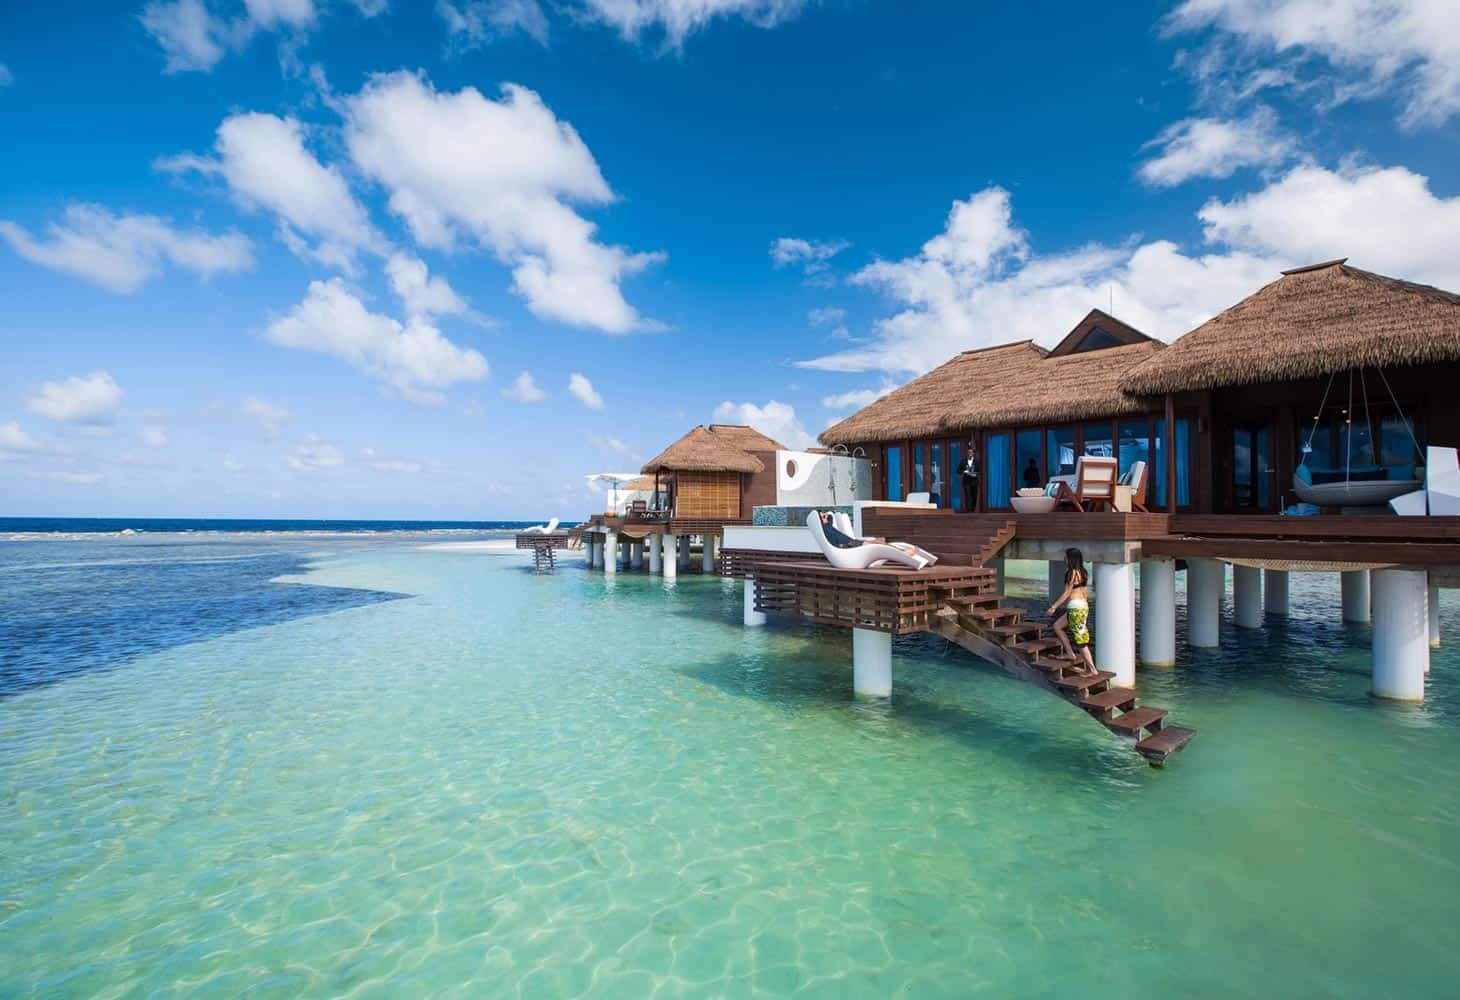 Image of overwater bungalows in Jamaica